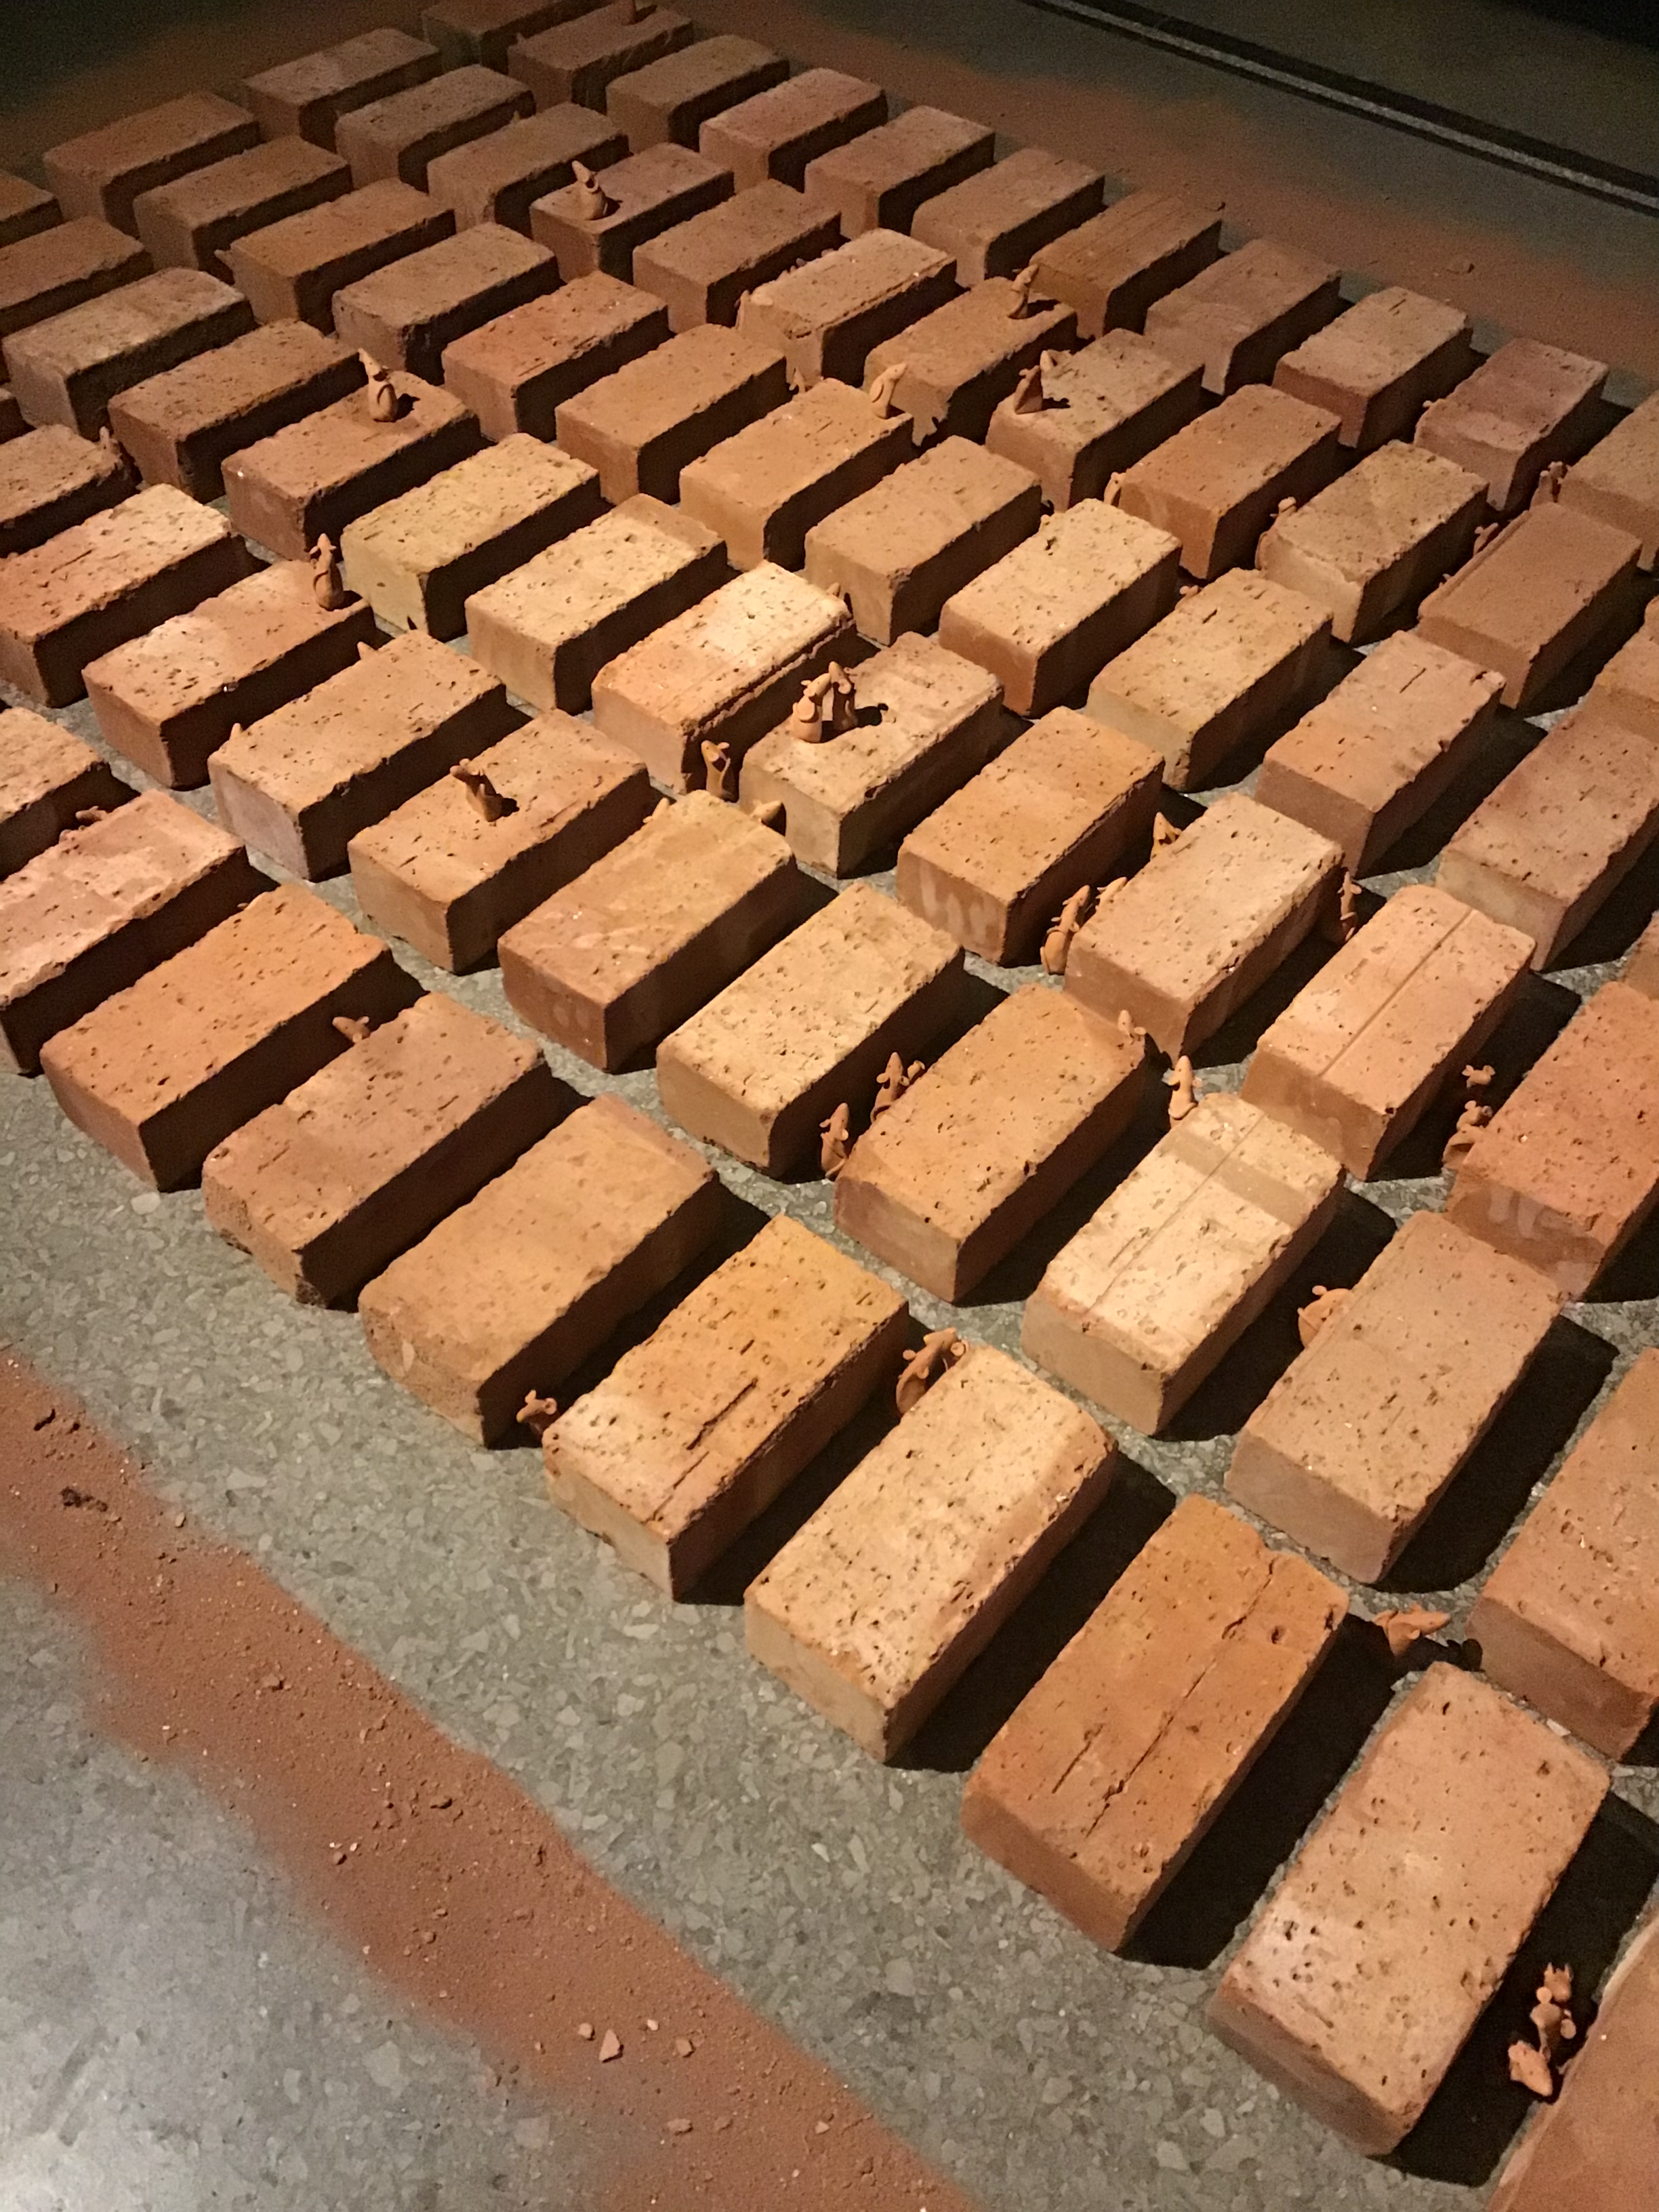 The Work is an installation made of clay bricks and mice